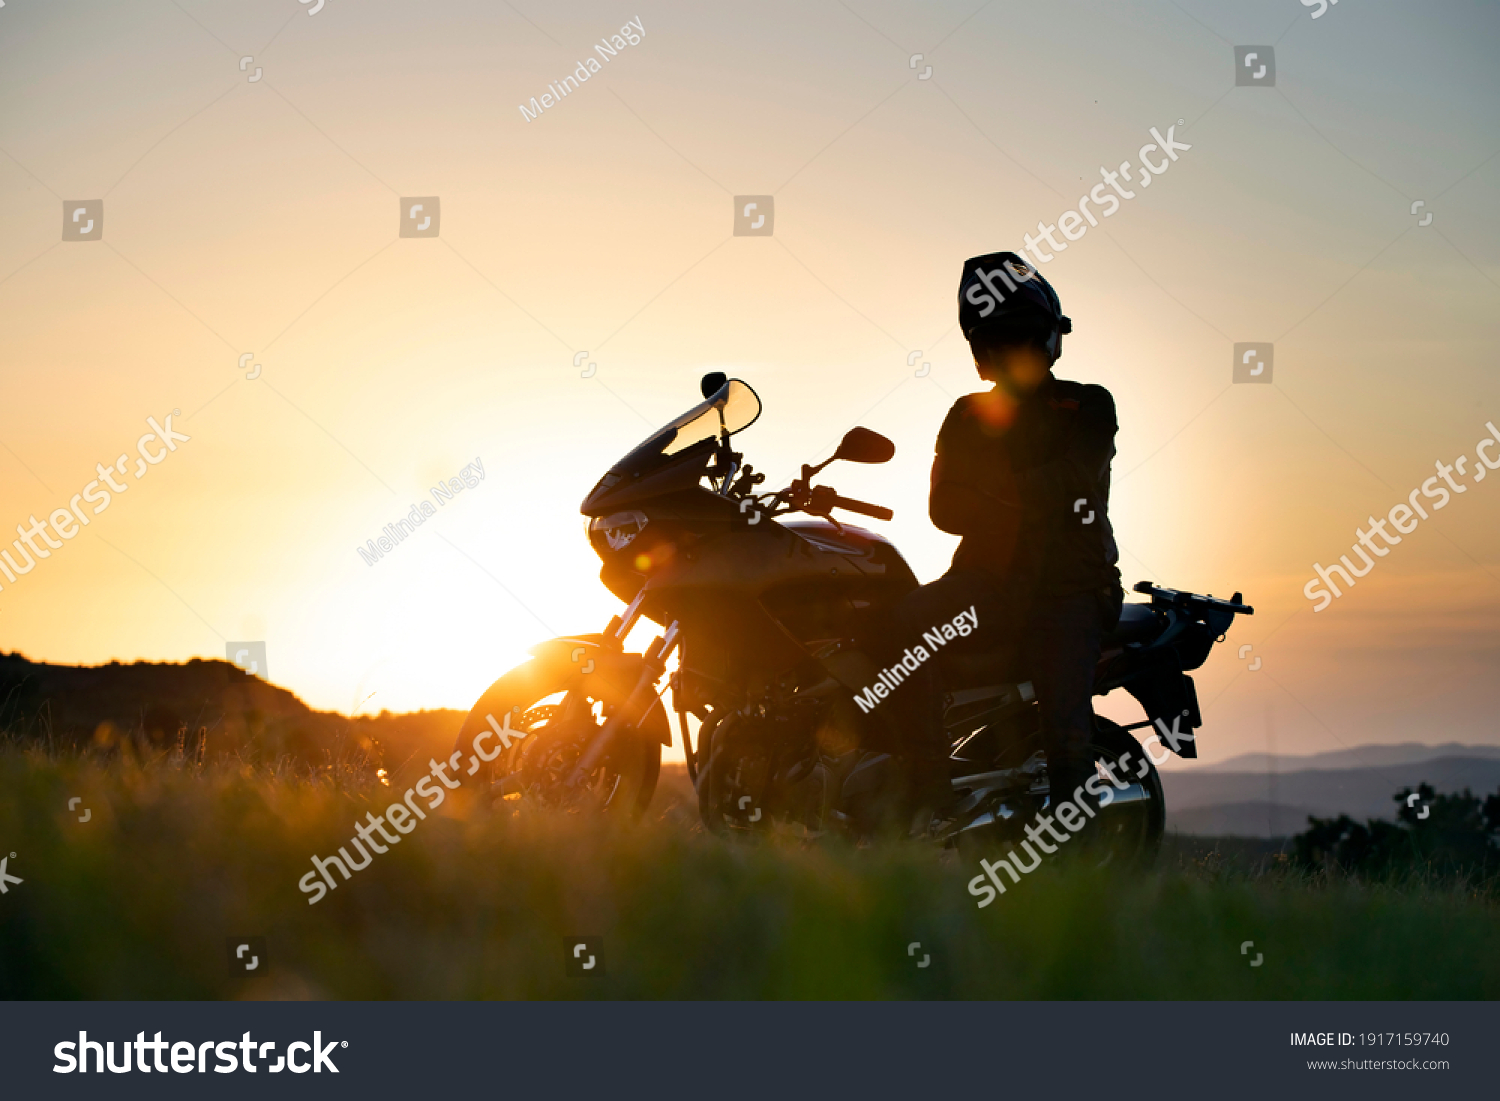 Young motorcycle rider on the road with sunset light background. #1917159740